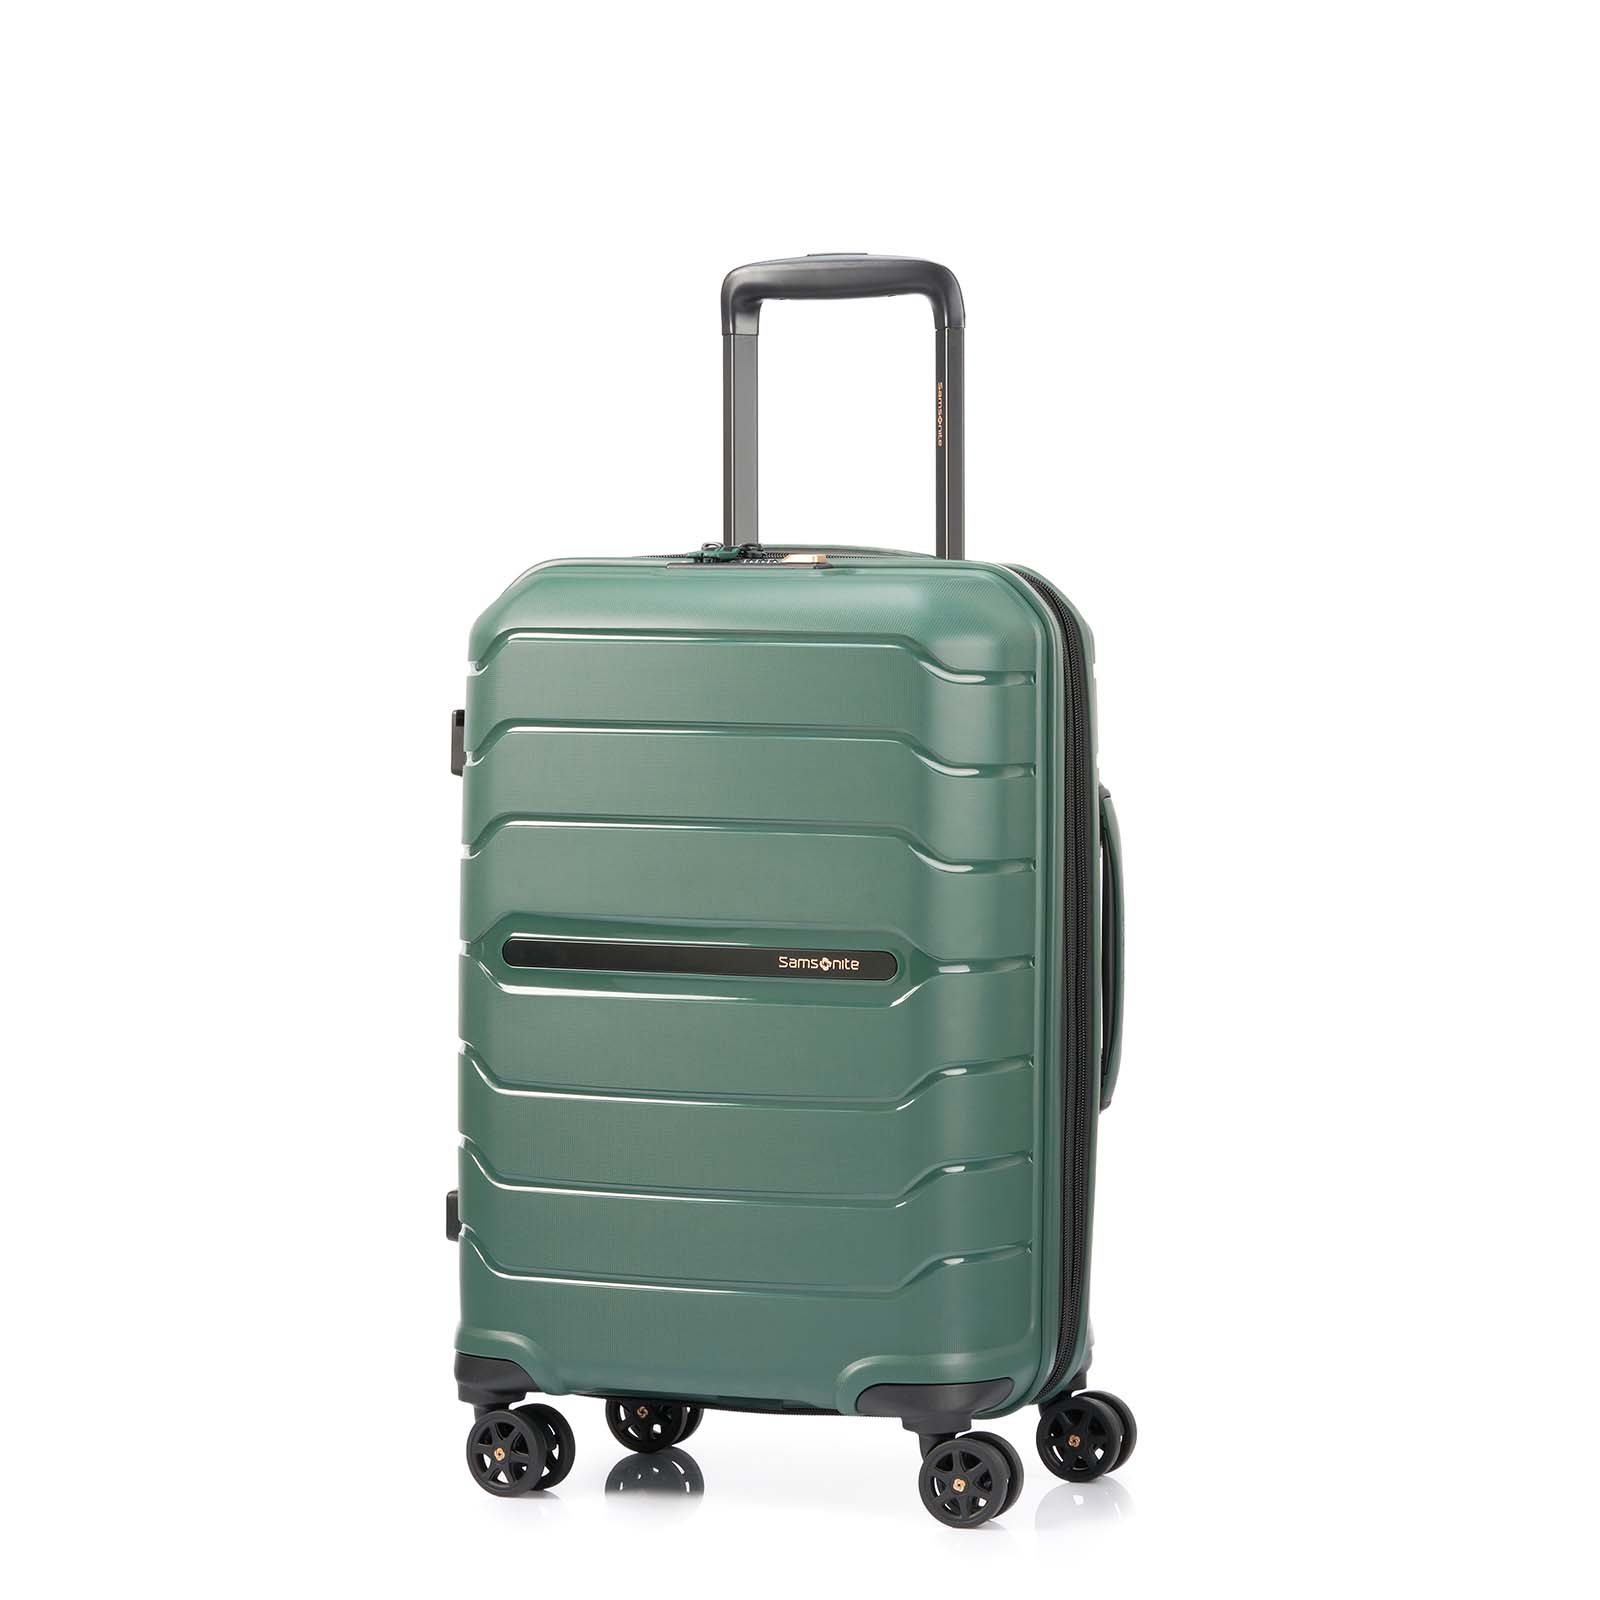 Samsonite-Oc2lite-55cm-Carry-On-Suitcase-Urban-Green-Front-Angle